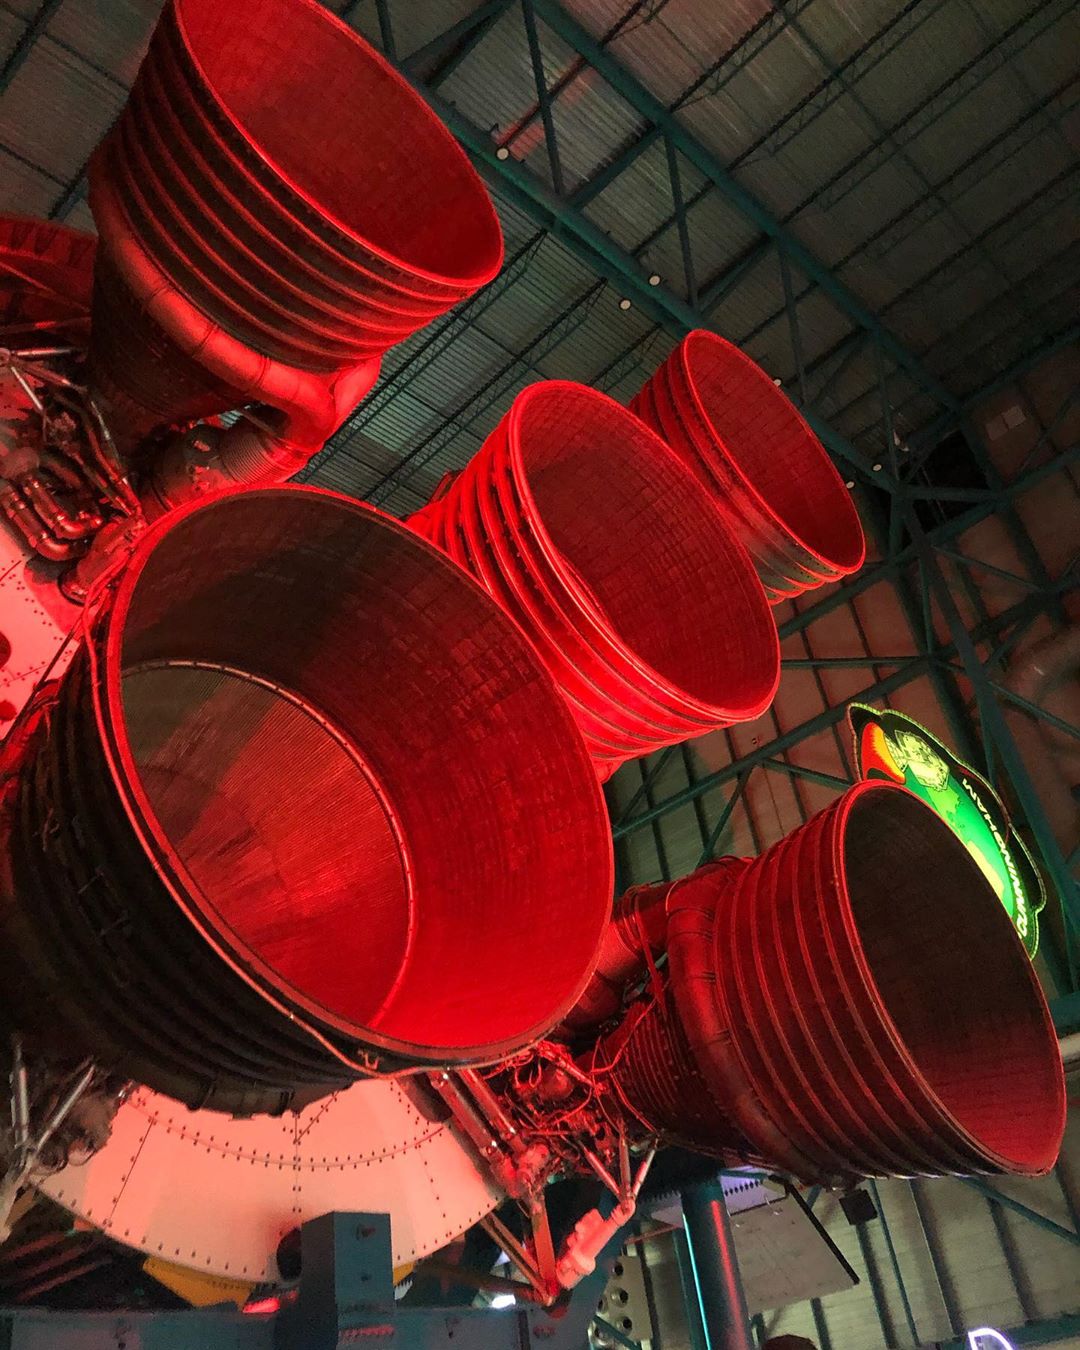 See NASA’s spaceships up close at the Kennedy Space Center Visitor Complex. It’s an experience you won’t forget.